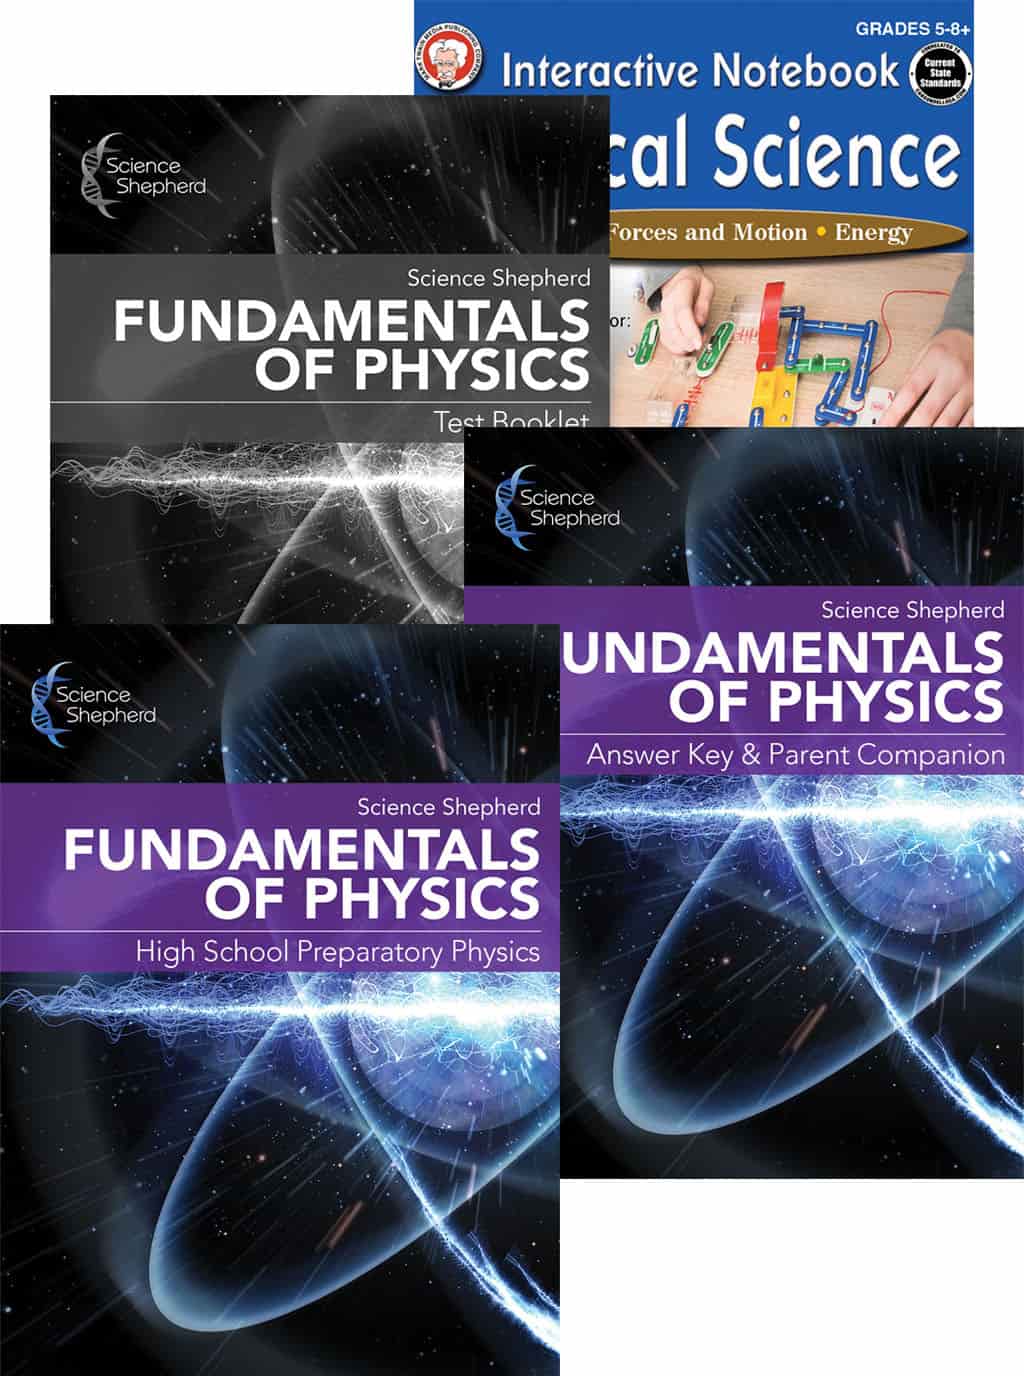 Physics curriculum homeschool 3-book set cover with textbook, test booklet, parent guide, lab manual